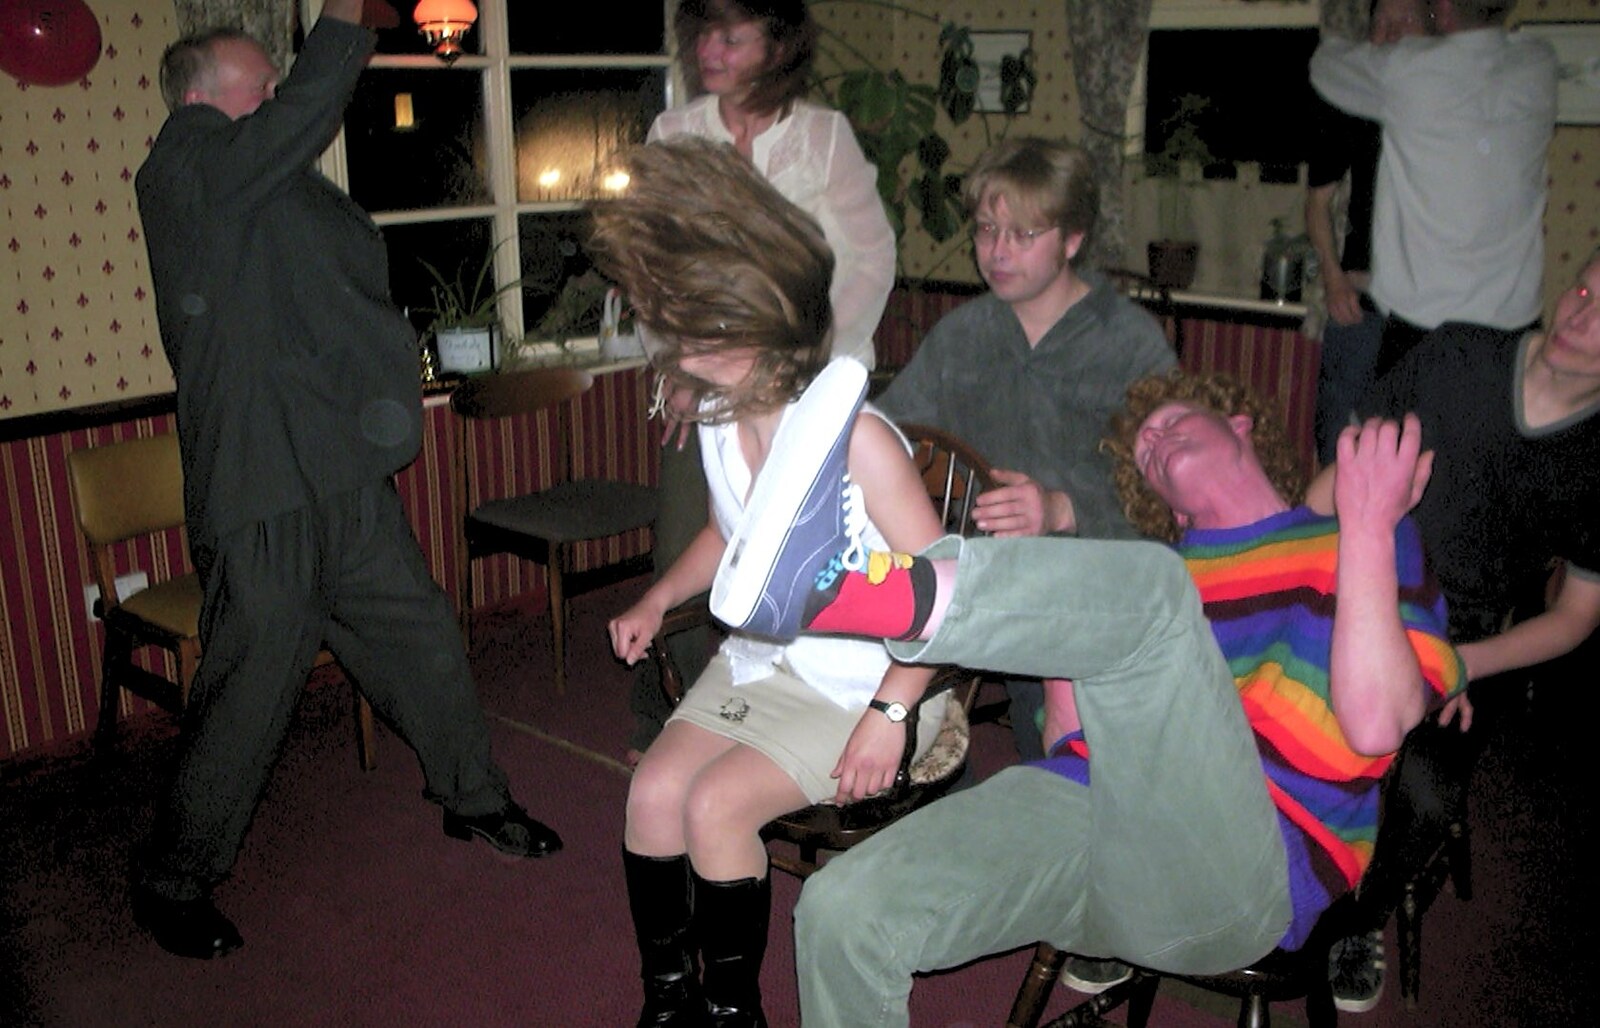 Some major hair and air-guitar action from Spammy's 50th Birthday at the Swan Inn, Brome, Suffolk - 26th April 2003